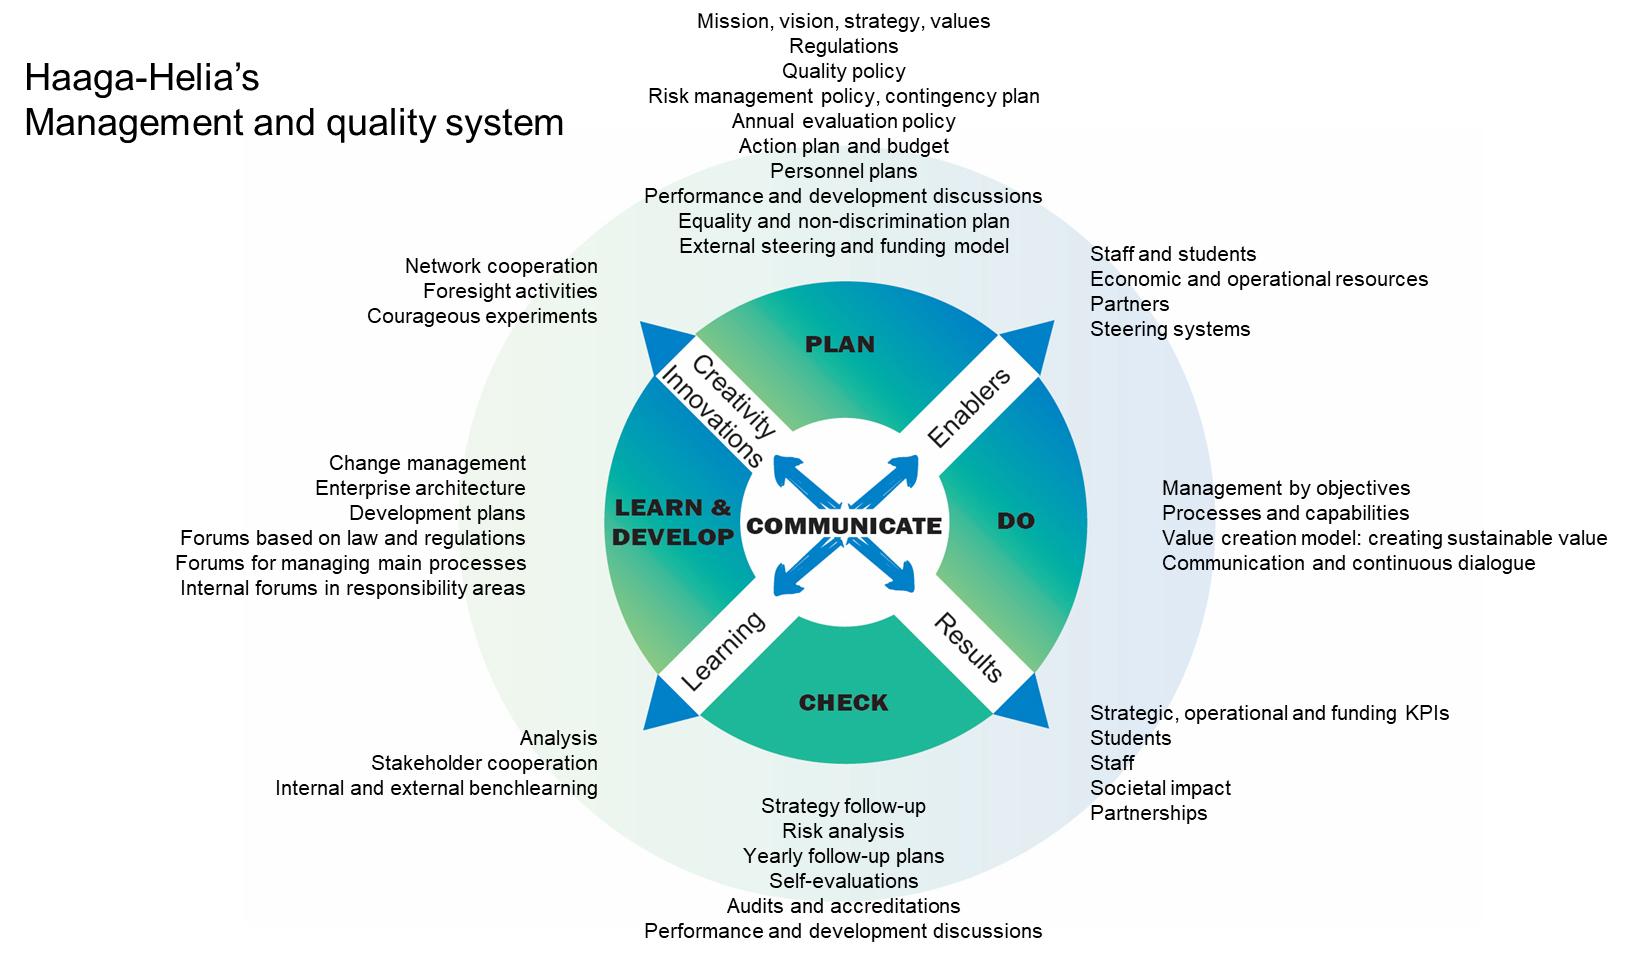 Picture 19. Haaga-Helia's management and quality system